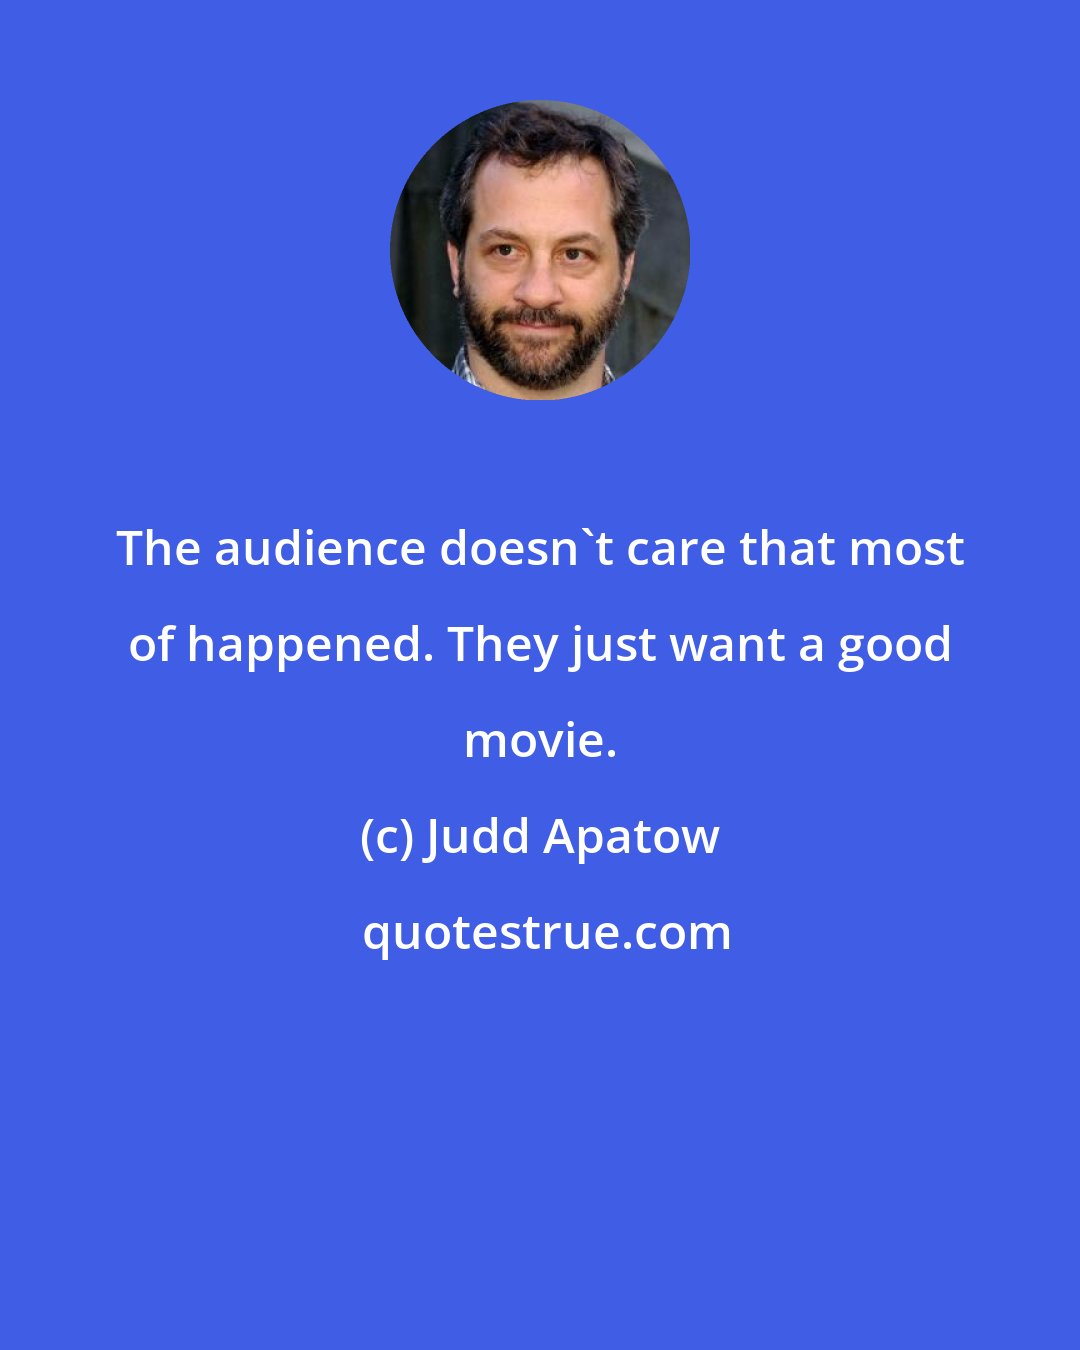 Judd Apatow: The audience doesn't care that most of happened. They just want a good movie.